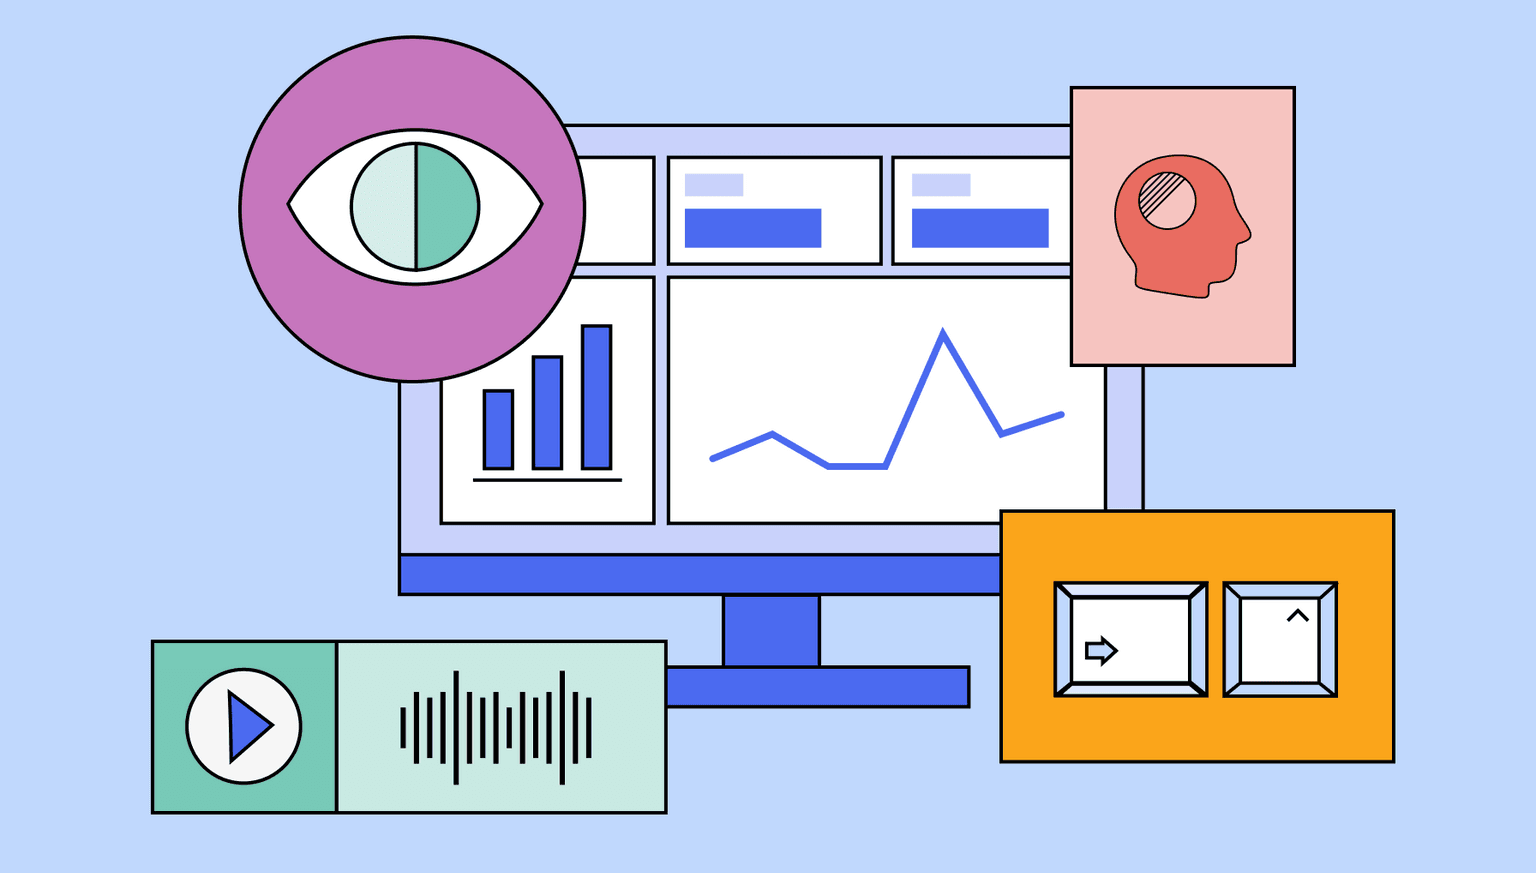 Illustration of accessibility related to business intelligence. Going clockwise, there’s an eye symbolizing color contrast, a head with a shaded circle in it symbolizing cognitive barriers, a dashboard within a monitor, Tab and Control buttons indicating keyboard navigation, a media player showing the play button and sound waves representing screen readers